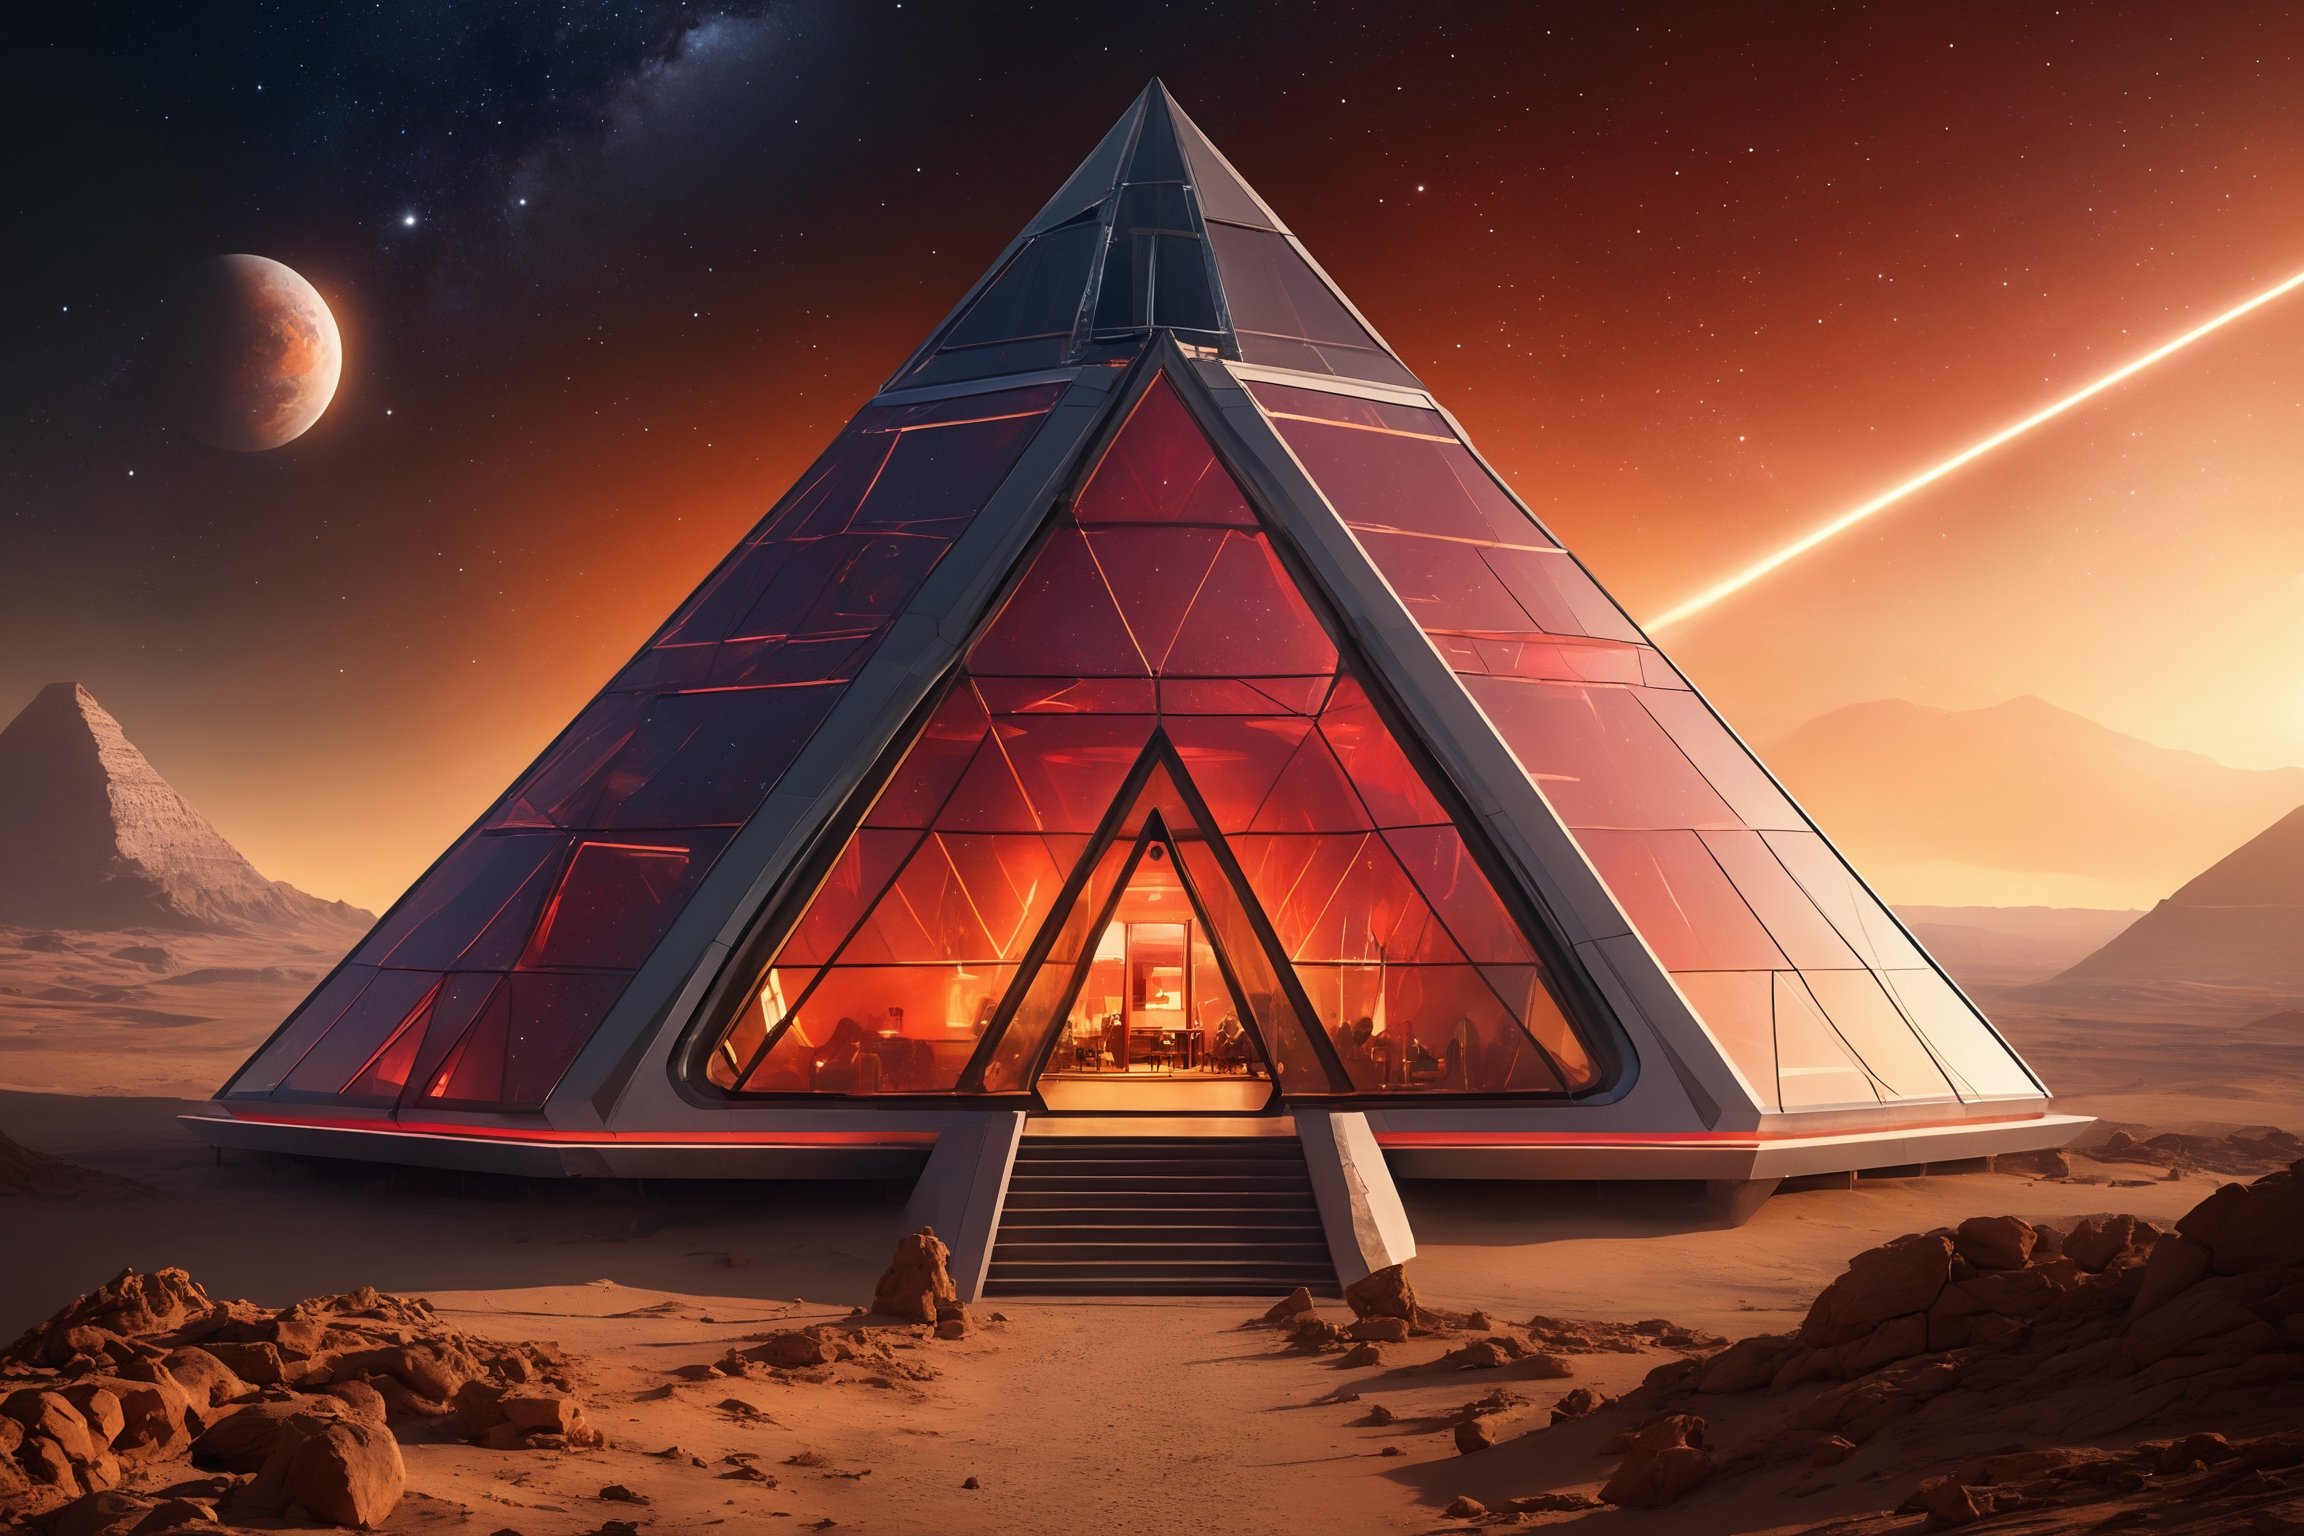 A futuristic, high-tech pyramid house rises from the milky way, illuminated by red lights and laser cannons. The rhombus windows reflect the stars, while the octagon door glows with a soft, golden light. The building's surface features intricate details, showcasing professional photography standards. In the background, a detailed, photorealistic cityscape stretches into the distance, with insane details and extreme depth of field, rivaling Ultra HD, HDR, and 8K quality.